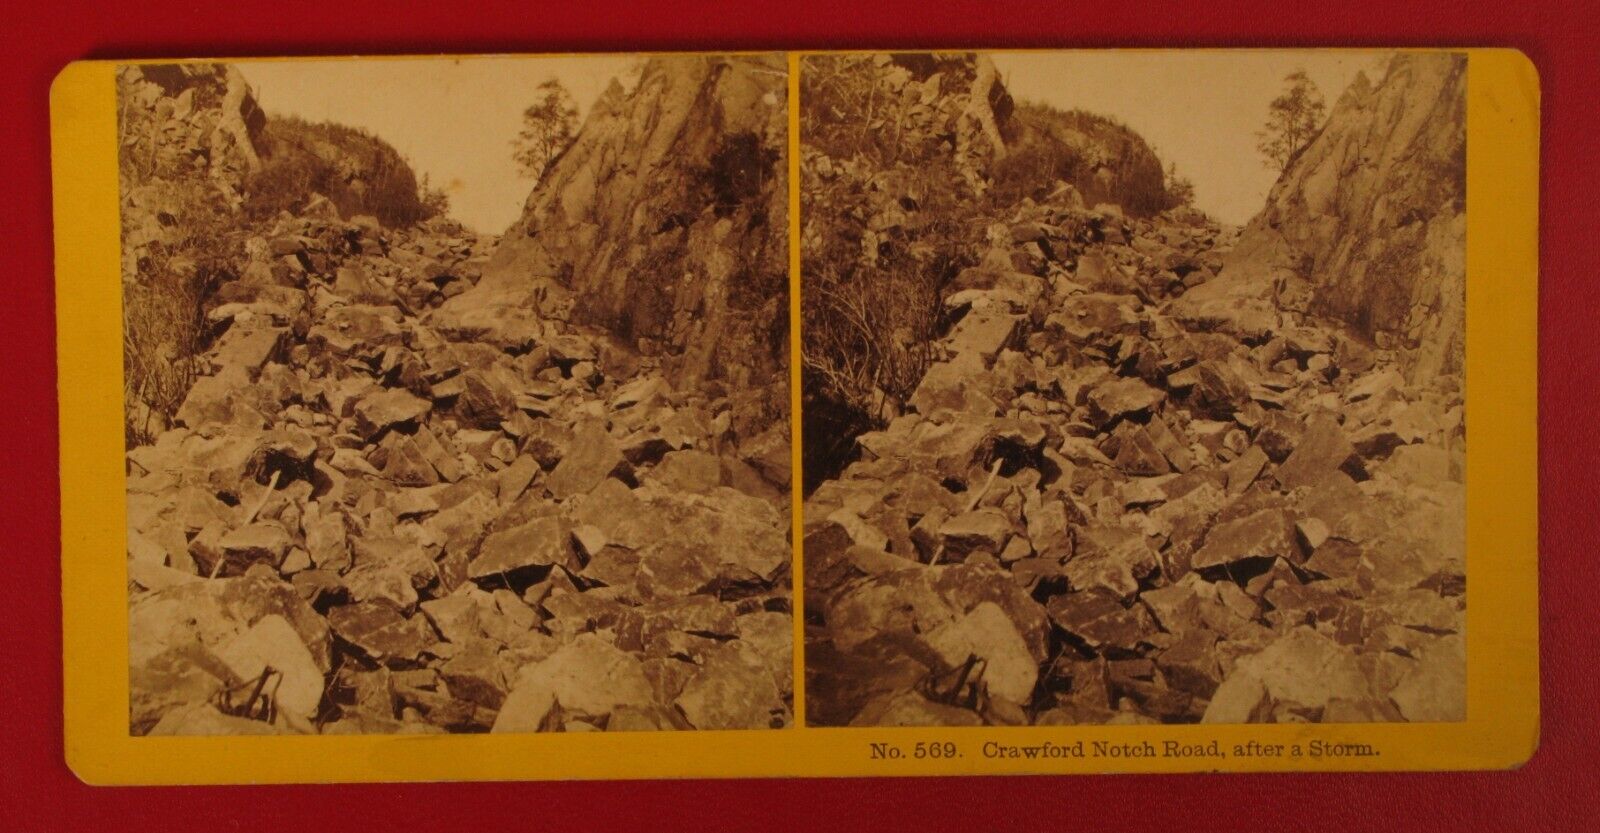 KILBURN AVALANCHE STORM SV STEREOVIEW CRAWFORD NOTCH ROAD WHITE MOUNTAINS 